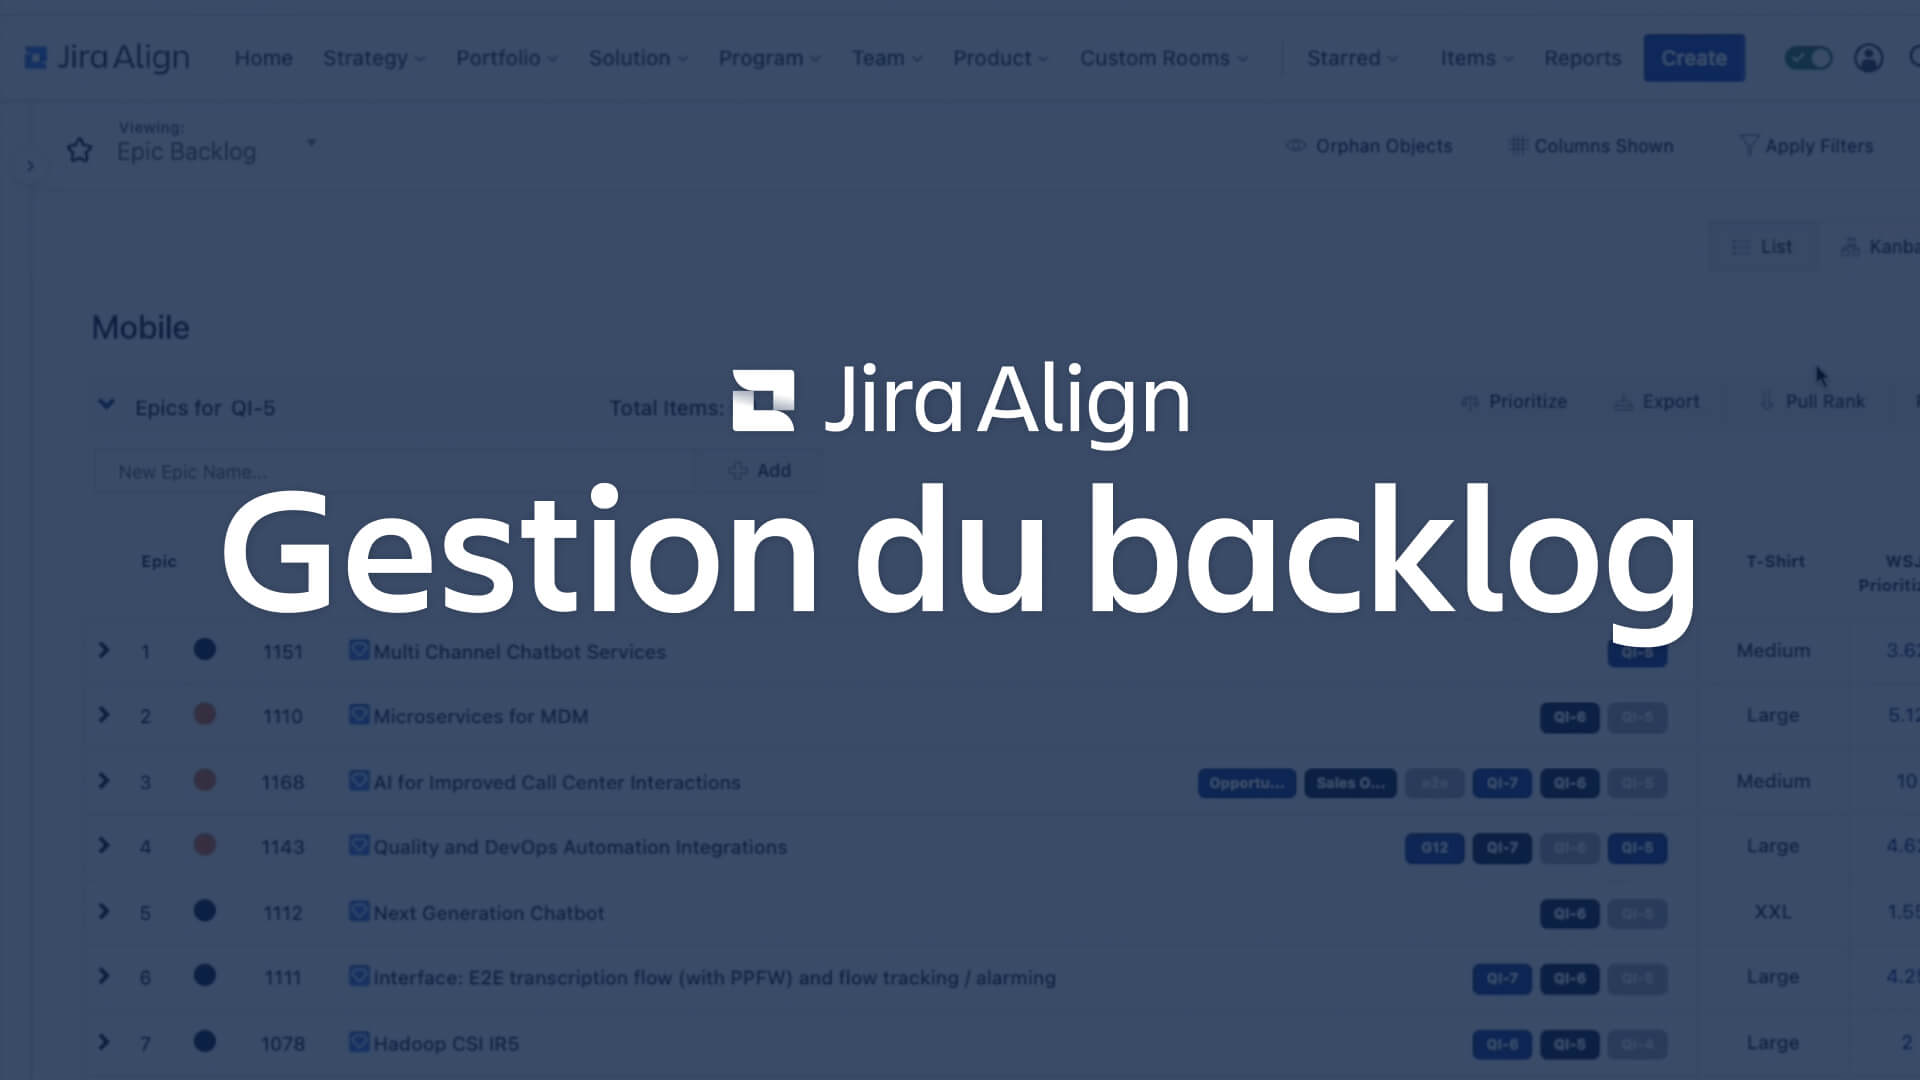 Backlog Management with Jira Align screen